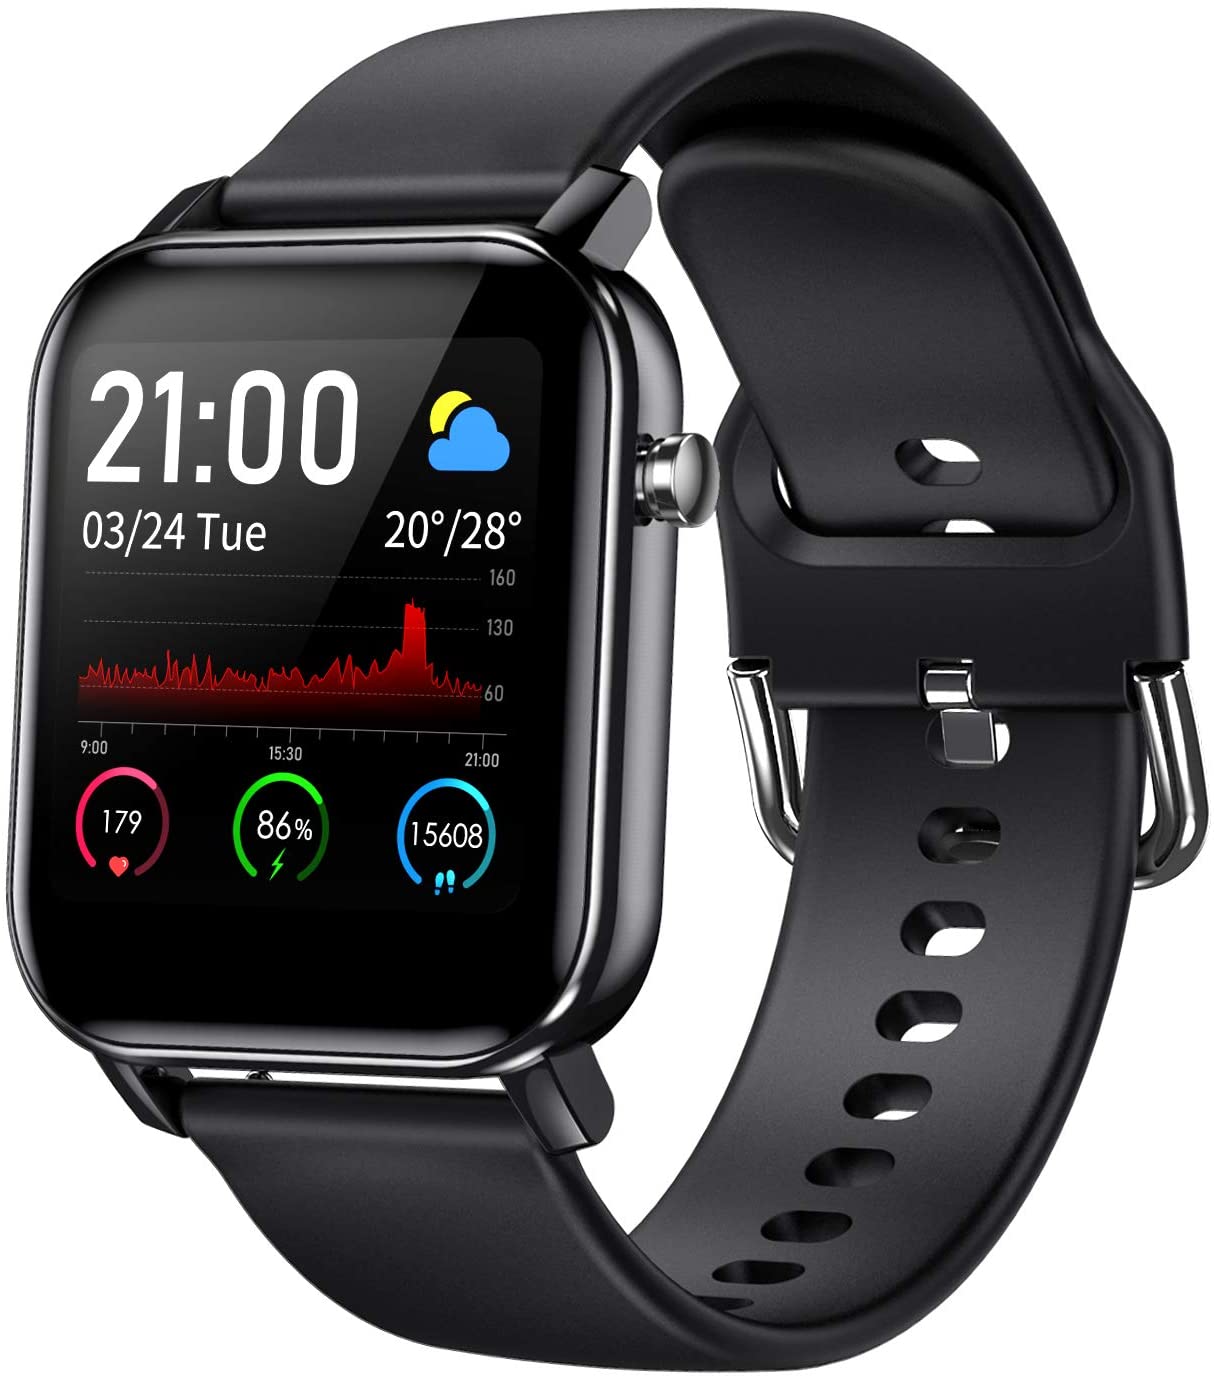 Smart Watch Fitness Tracker with 1.4" Touch Screen - Media Box Ent